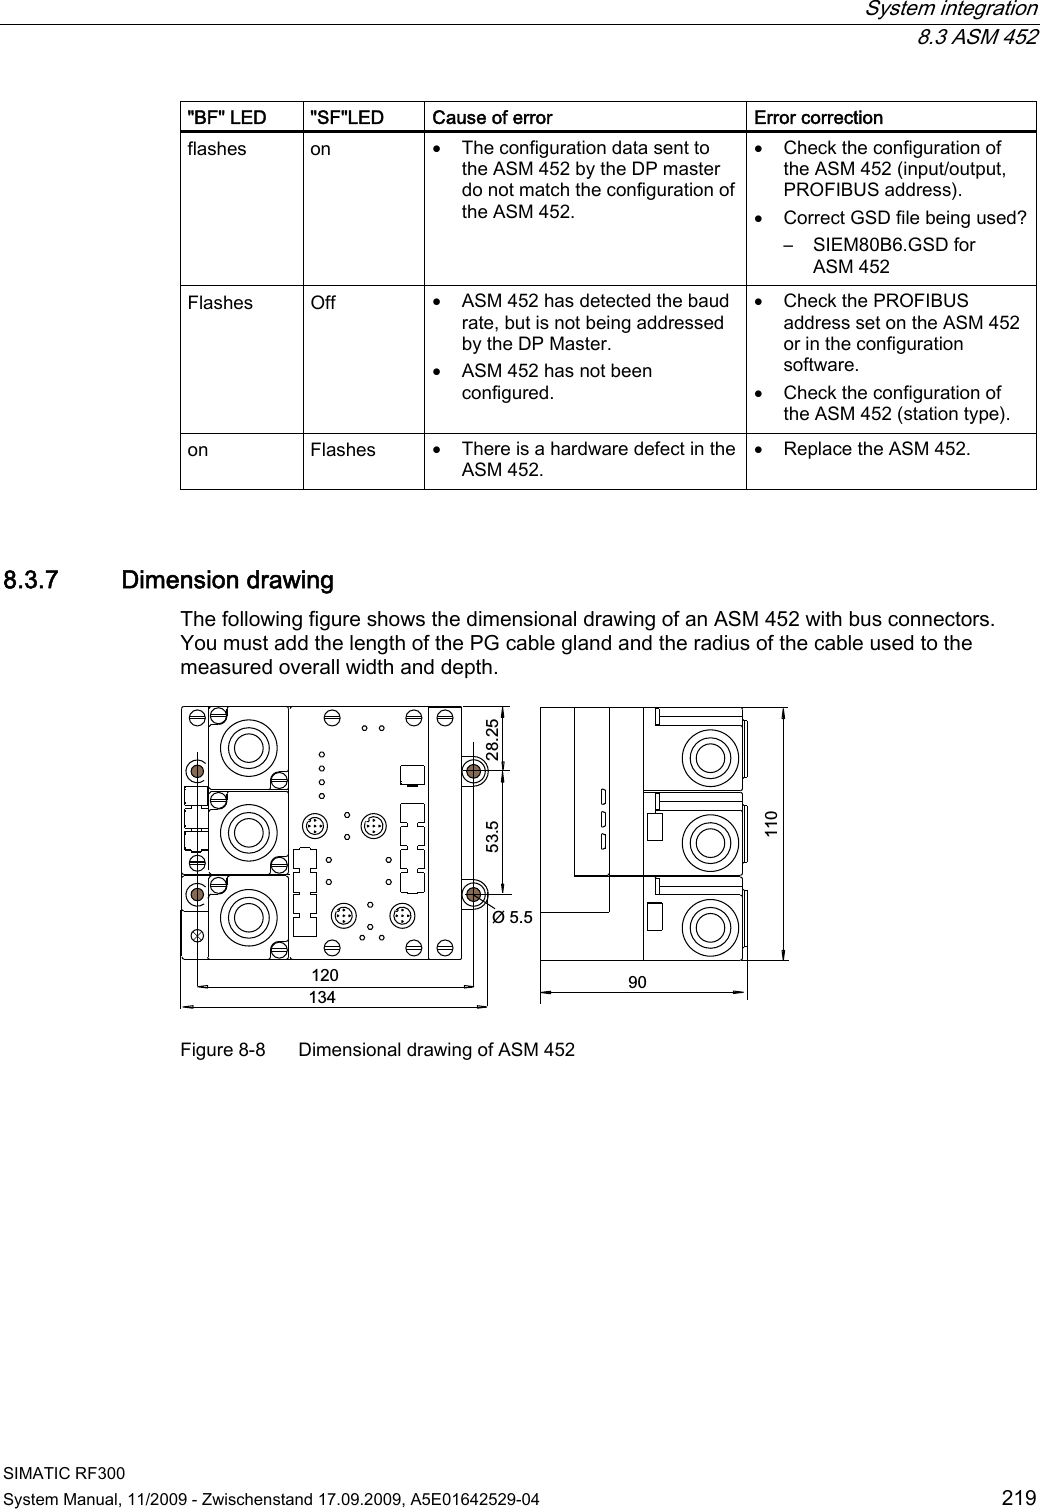  System integration  8.3 ASM 452 SIMATIC RF300 System Manual, 11/2009 - Zwischenstand 17.09.2009, A5E01642529-04  219 &quot;BF&quot; LED  &quot;SF&quot;LED  Cause of error  Error correction flashes  on   The configuration data sent to the ASM 452 by the DP master do not match the configuration of the ASM 452.  Check the configuration of the ASM 452 (input/output, PROFIBUS address).  Correct GSD file being used?– SIEM80B6.GSD for ASM 452 Flashes  Off   ASM 452 has detected the baud rate, but is not being addressed by the DP Master.  ASM 452 has not been configured.  Check the PROFIBUS address set on the ASM 452 or in the configuration software.  Check the configuration of the ASM 452 (station type). on  Flashes   There is a hardware defect in the ASM 452.  Replace the ASM 452. 8.3.7 Dimension drawing The following figure shows the dimensional drawing of an ASM 452 with bus connectors. You must add the length of the PG cable gland and the radius of the cable used to the measured overall width and depth.   Figure 8-8  Dimensional drawing of ASM 452 